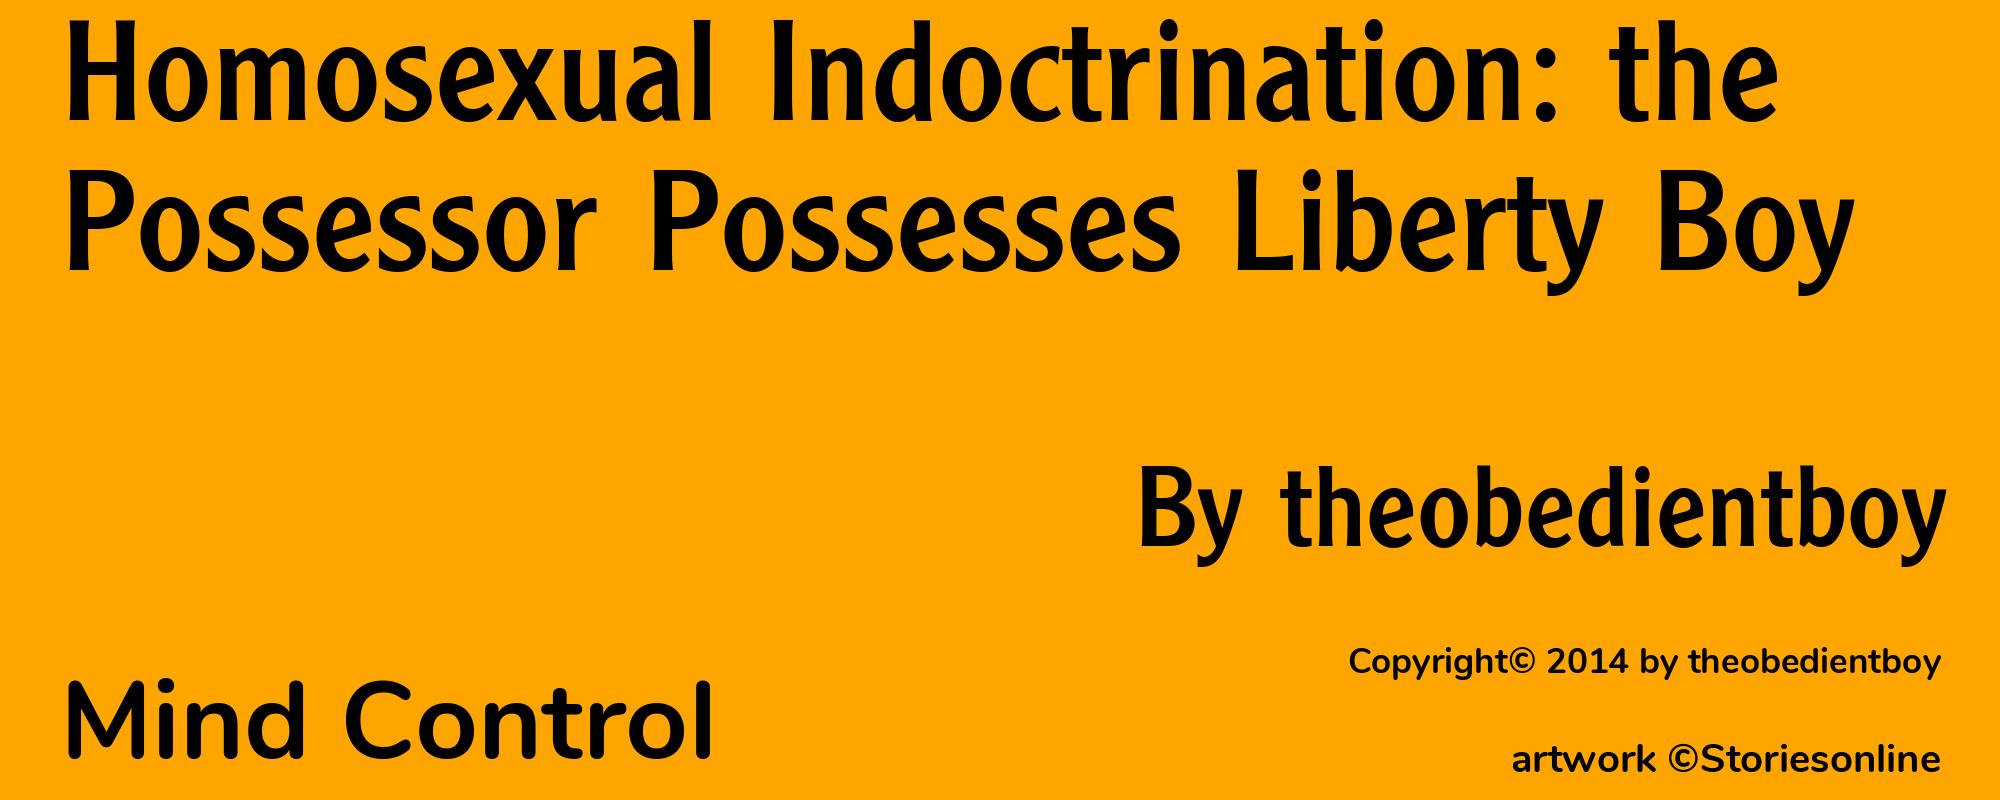 Homosexual Indoctrination: the Possessor Possesses Liberty Boy - Cover